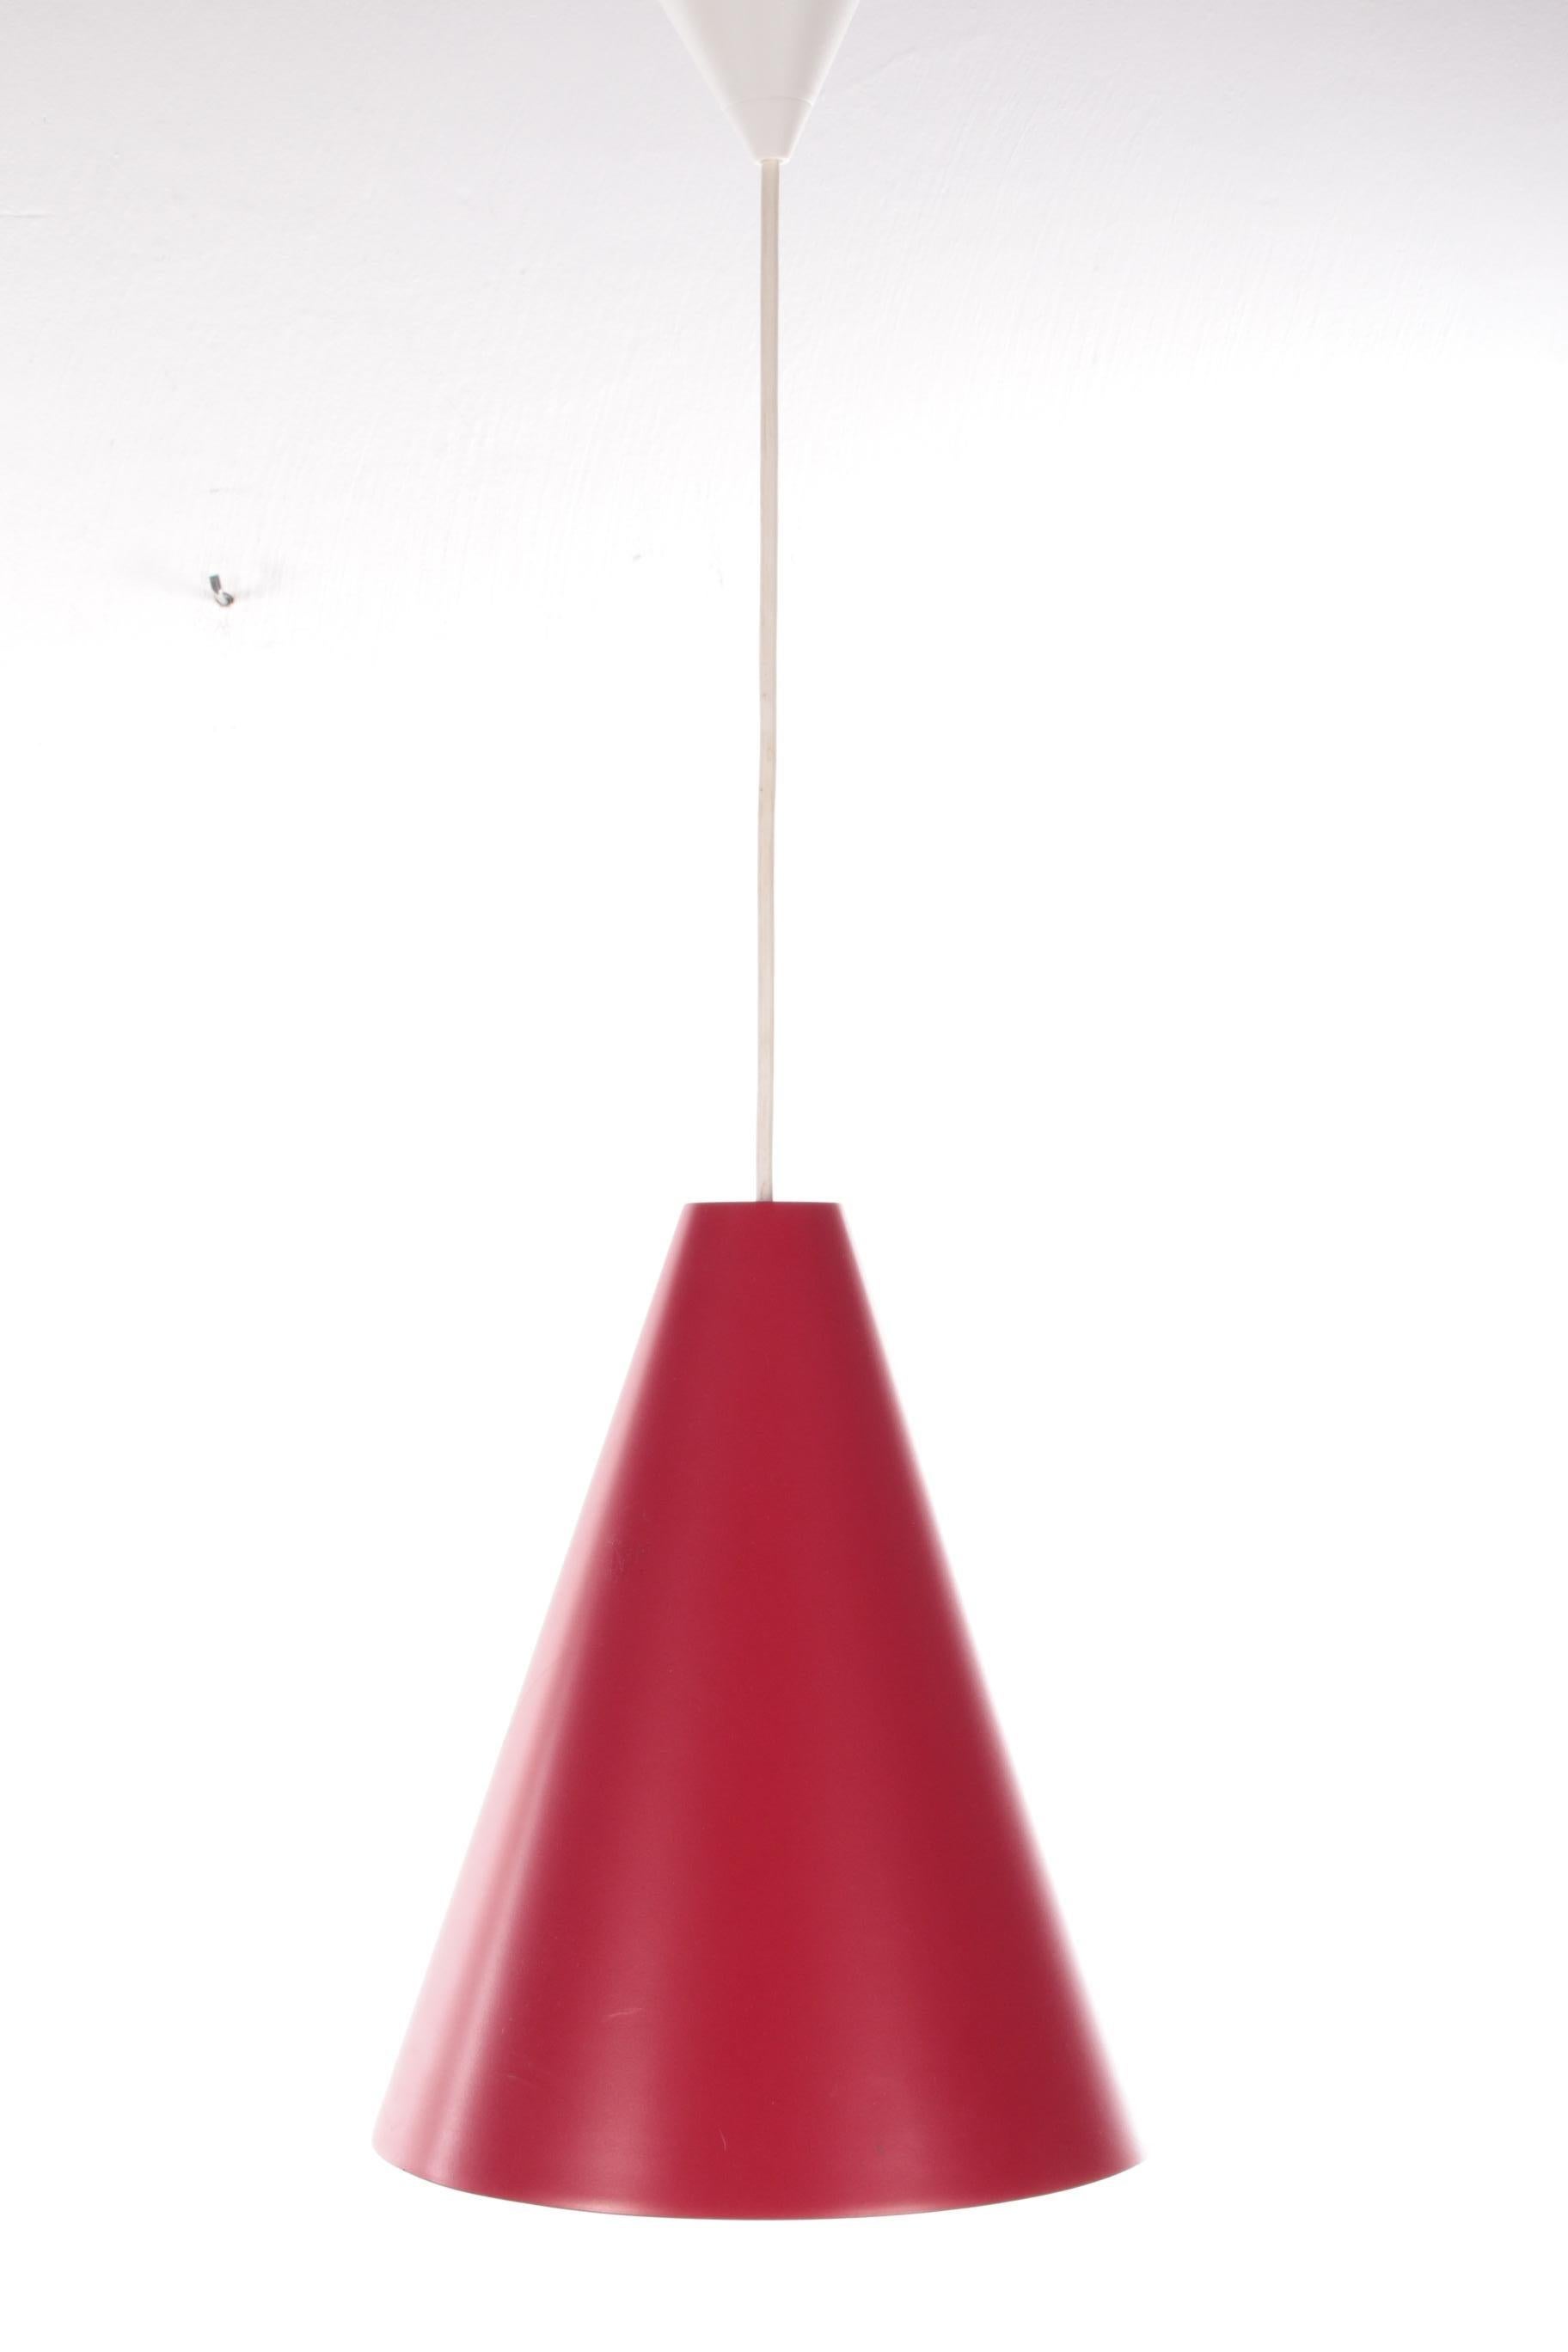 Red point hanging lamp with glass in it made in the 1960s.

This is an early model hanging lamp once made for Ikea.

Made of metal with a white glass kind of screen in the 60s.

This lamp is in excellent condition and could last for years to